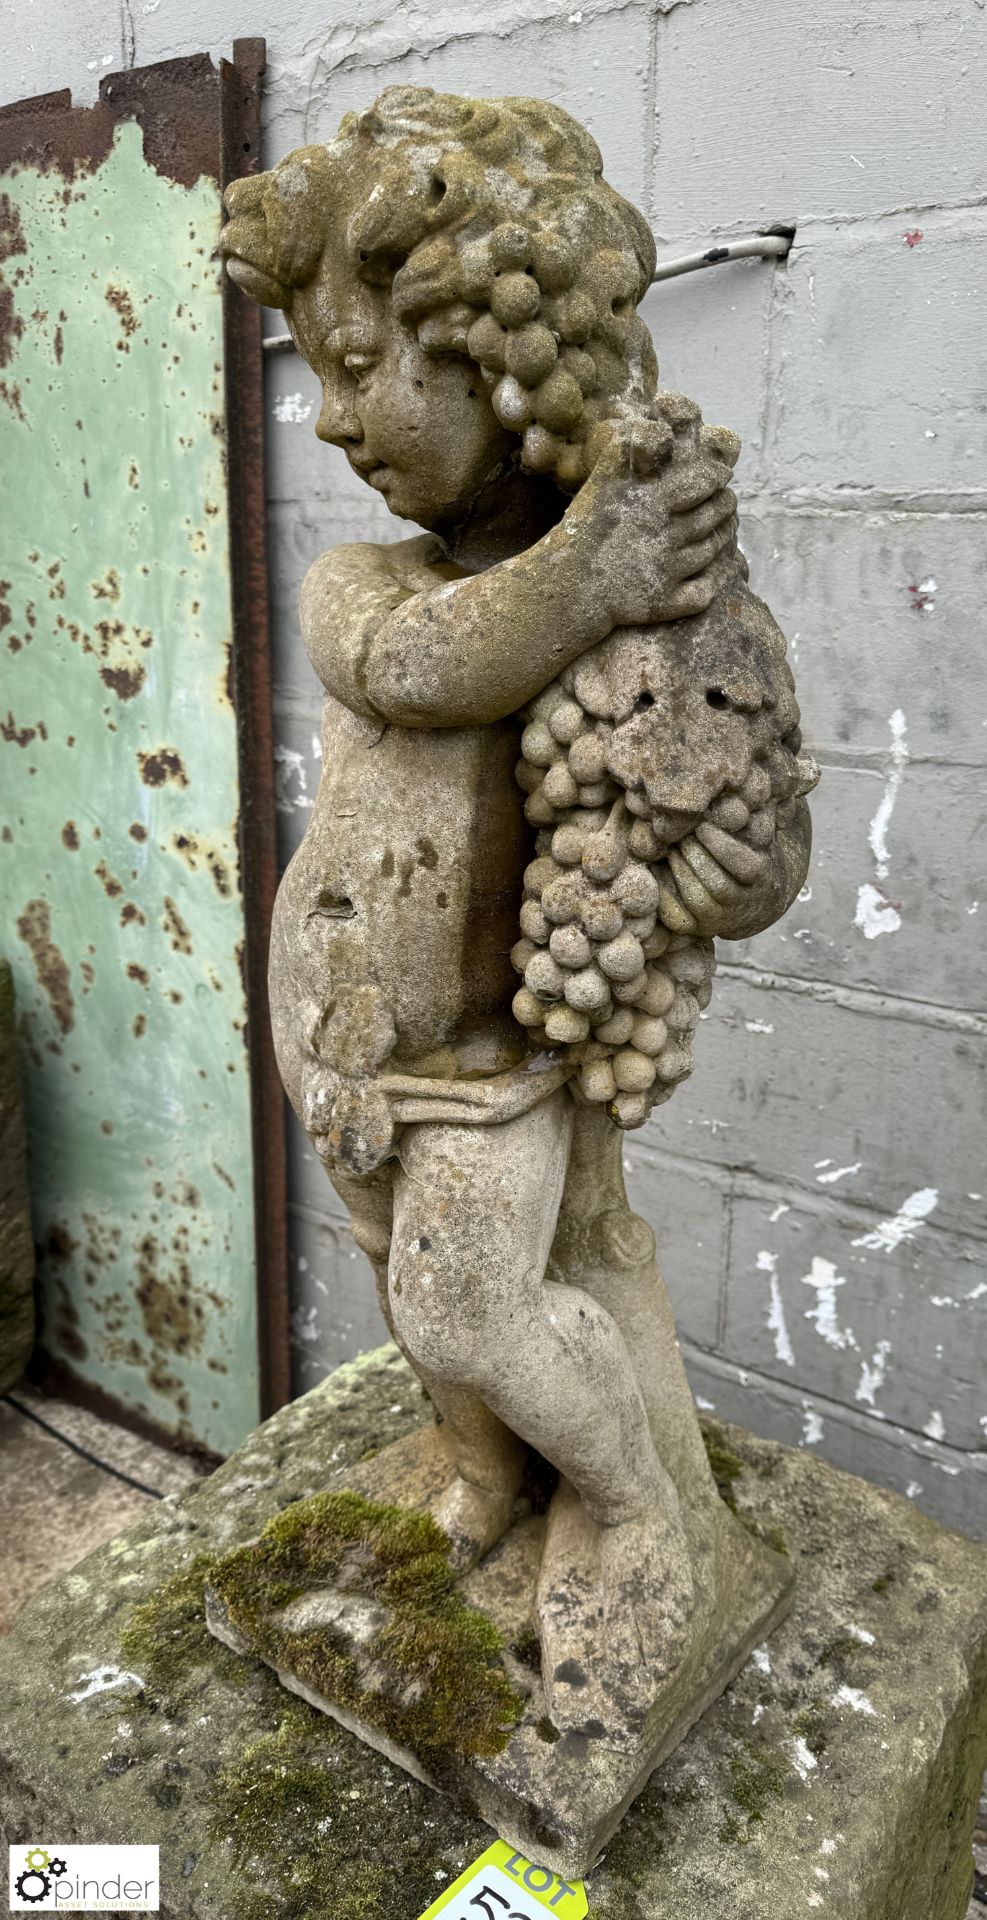 Reconstituted stone Figure Cherub with grapes, 910mm tall - Image 2 of 5